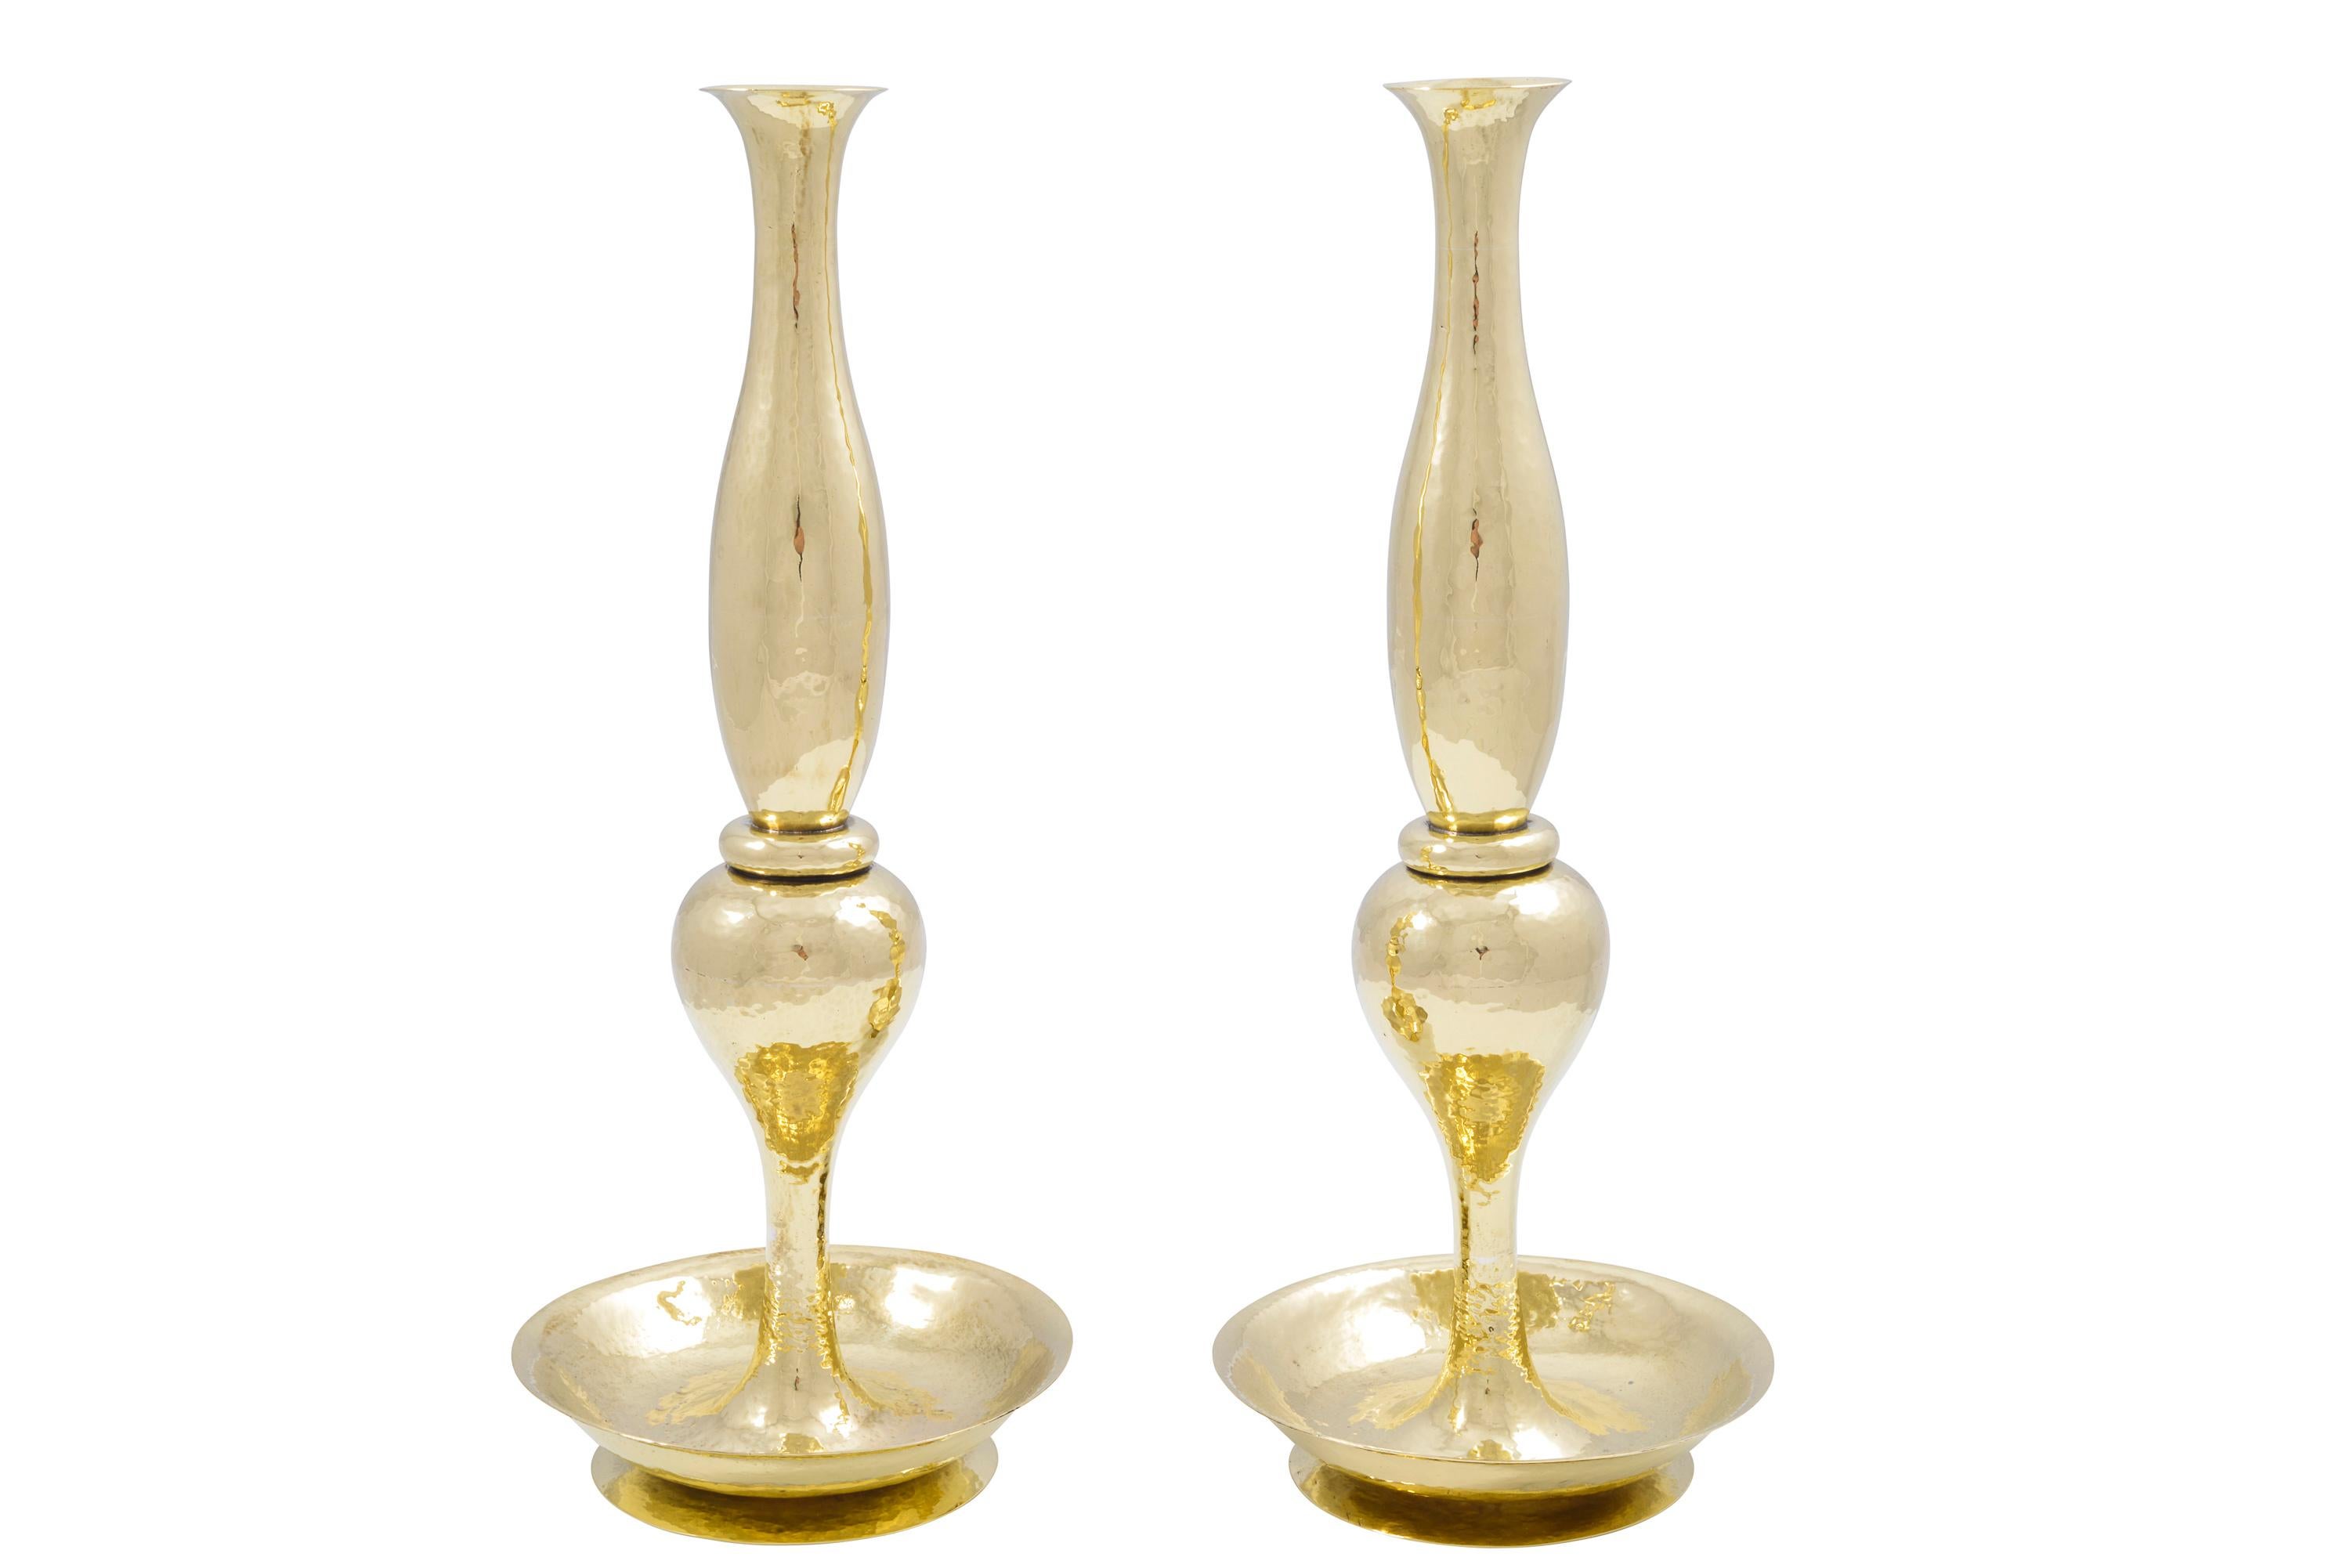 Pair of brass vases Austrian Jugendstil Josef Hoffmann Wiener Werkstatte, circa 1920

Josef Hoffmann designed this pair of vases in the early 1920s, probably around 1921. Hammered entirely out of brass, this pair exudes a particularly fine